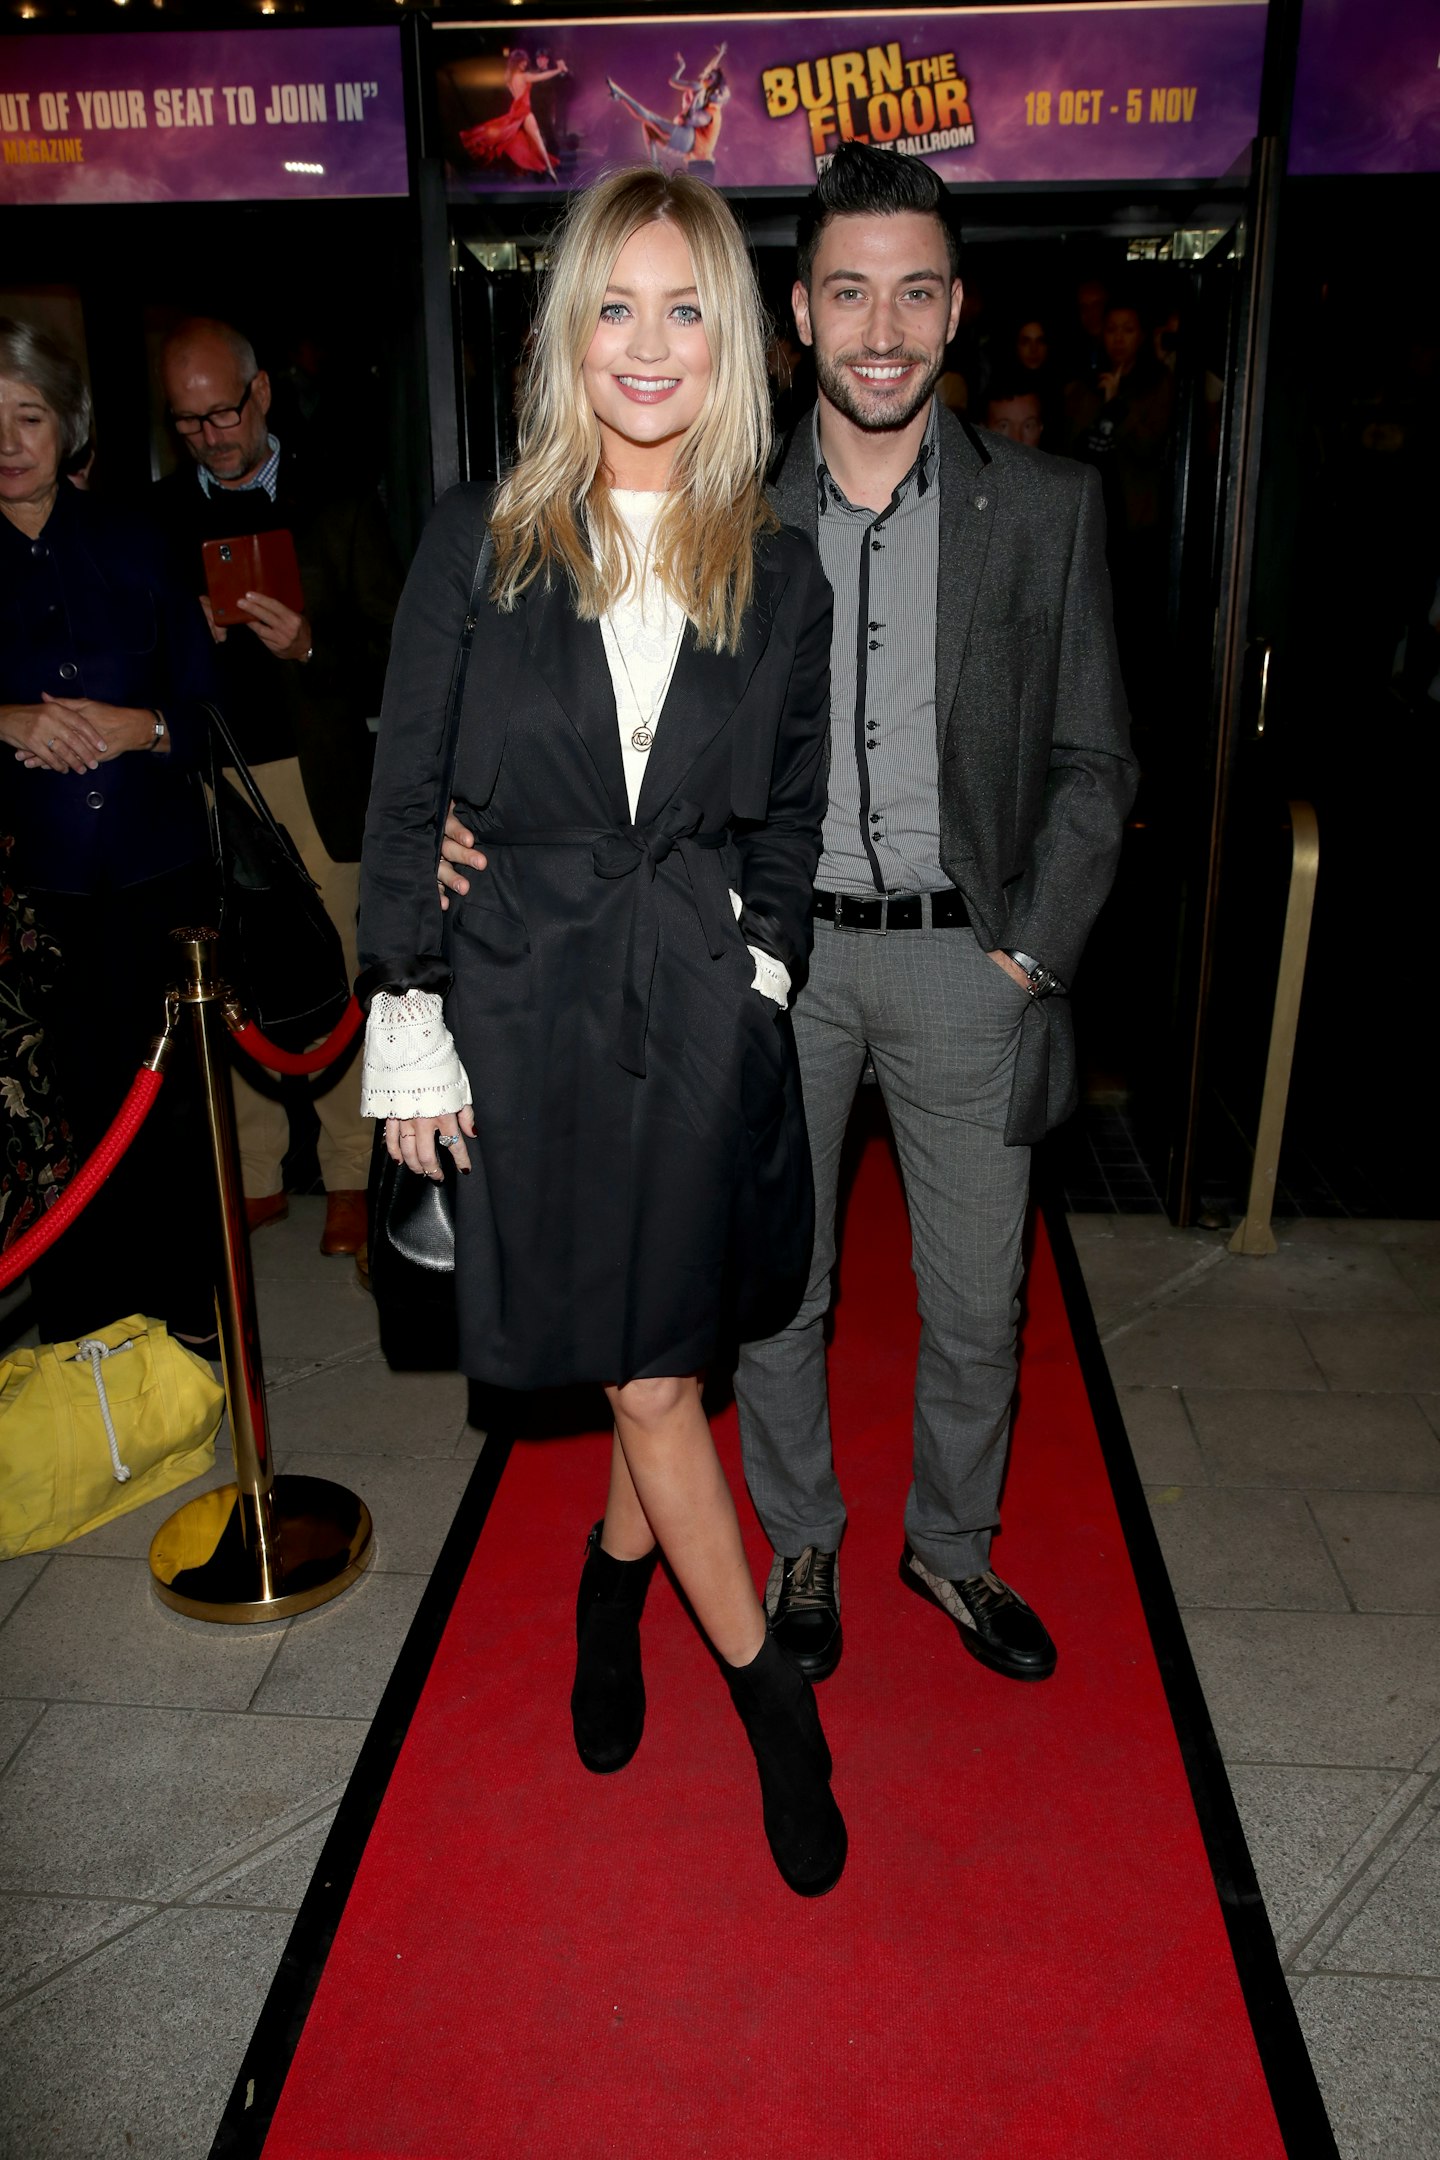 Laura Whitmore Strictly Come Dancing